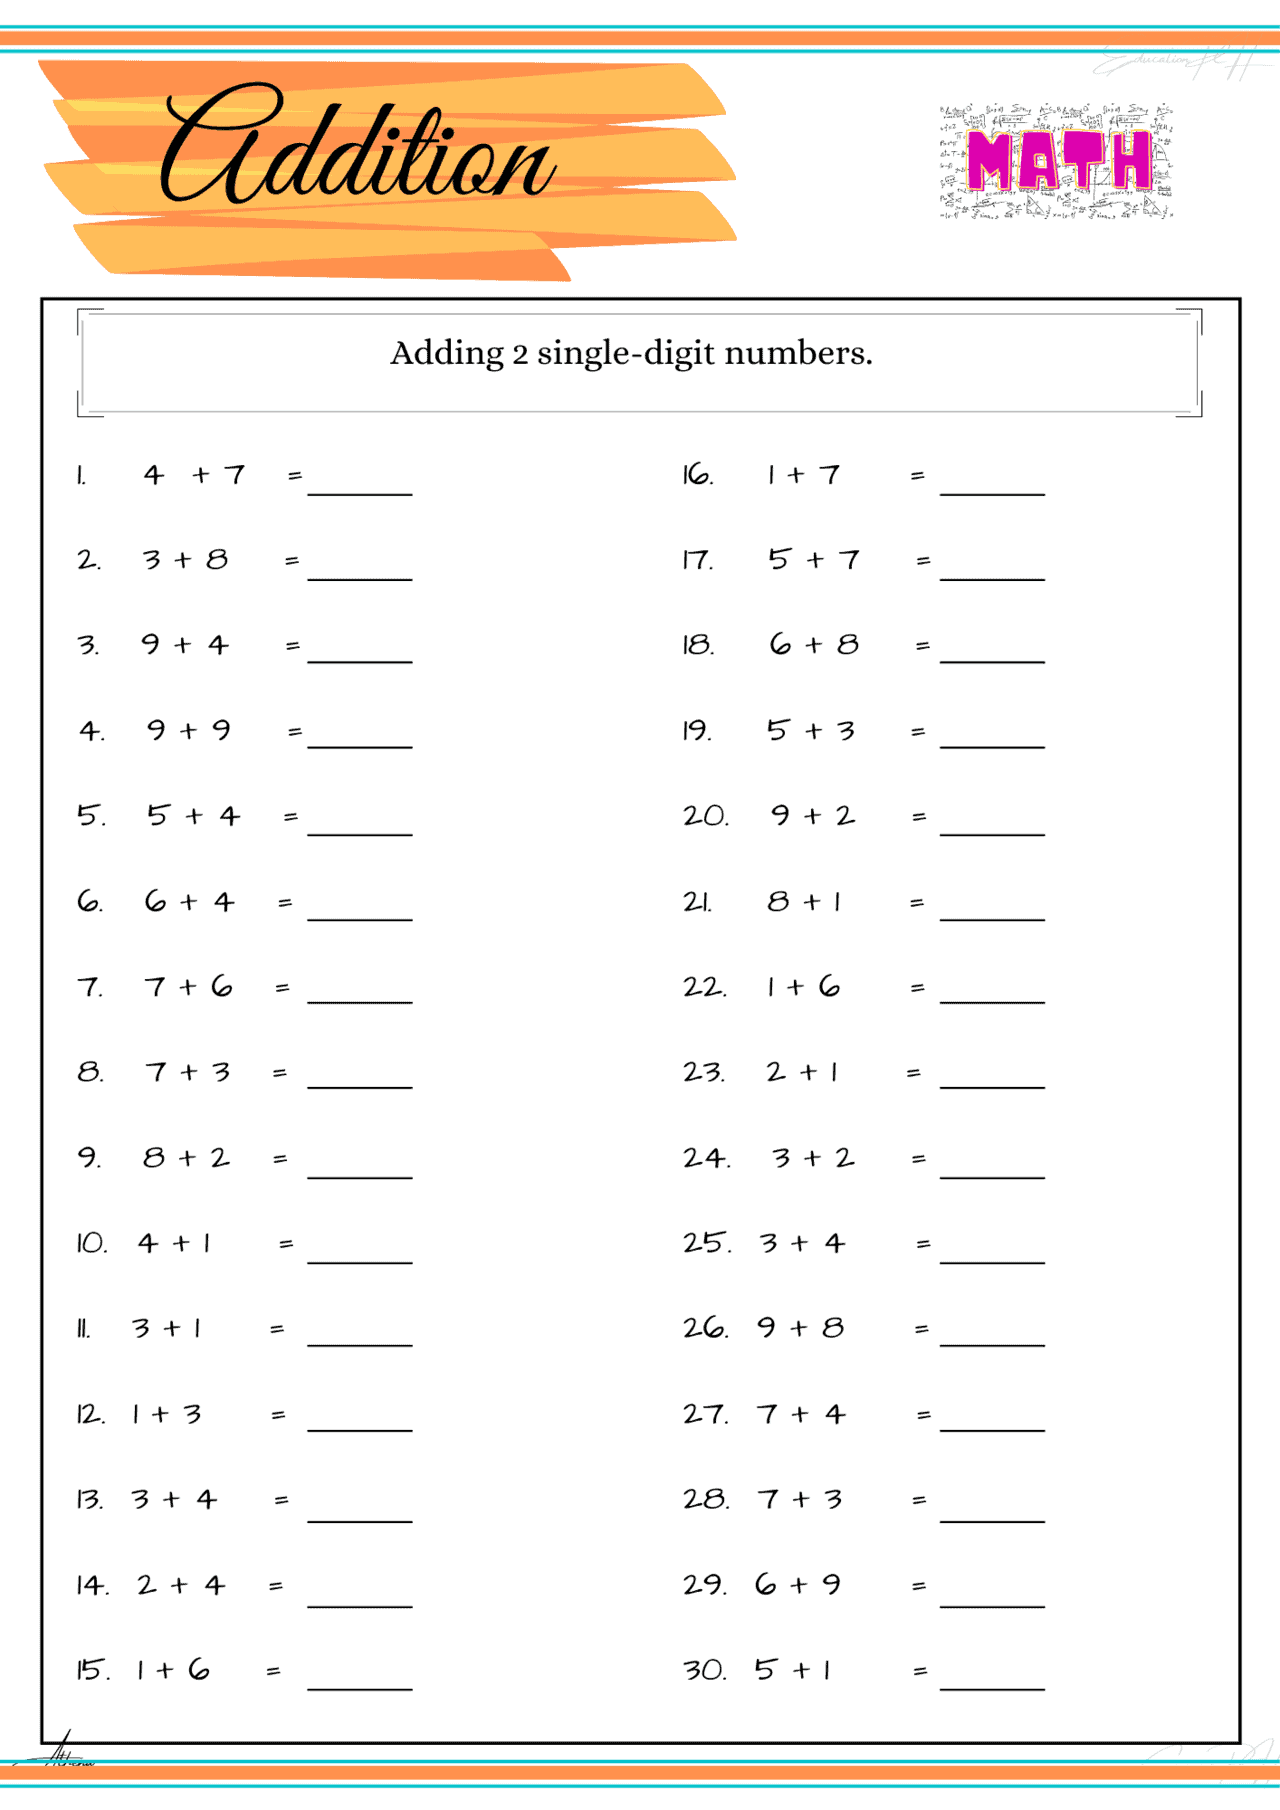 Live Worksheet For Class 2 Maths Addition